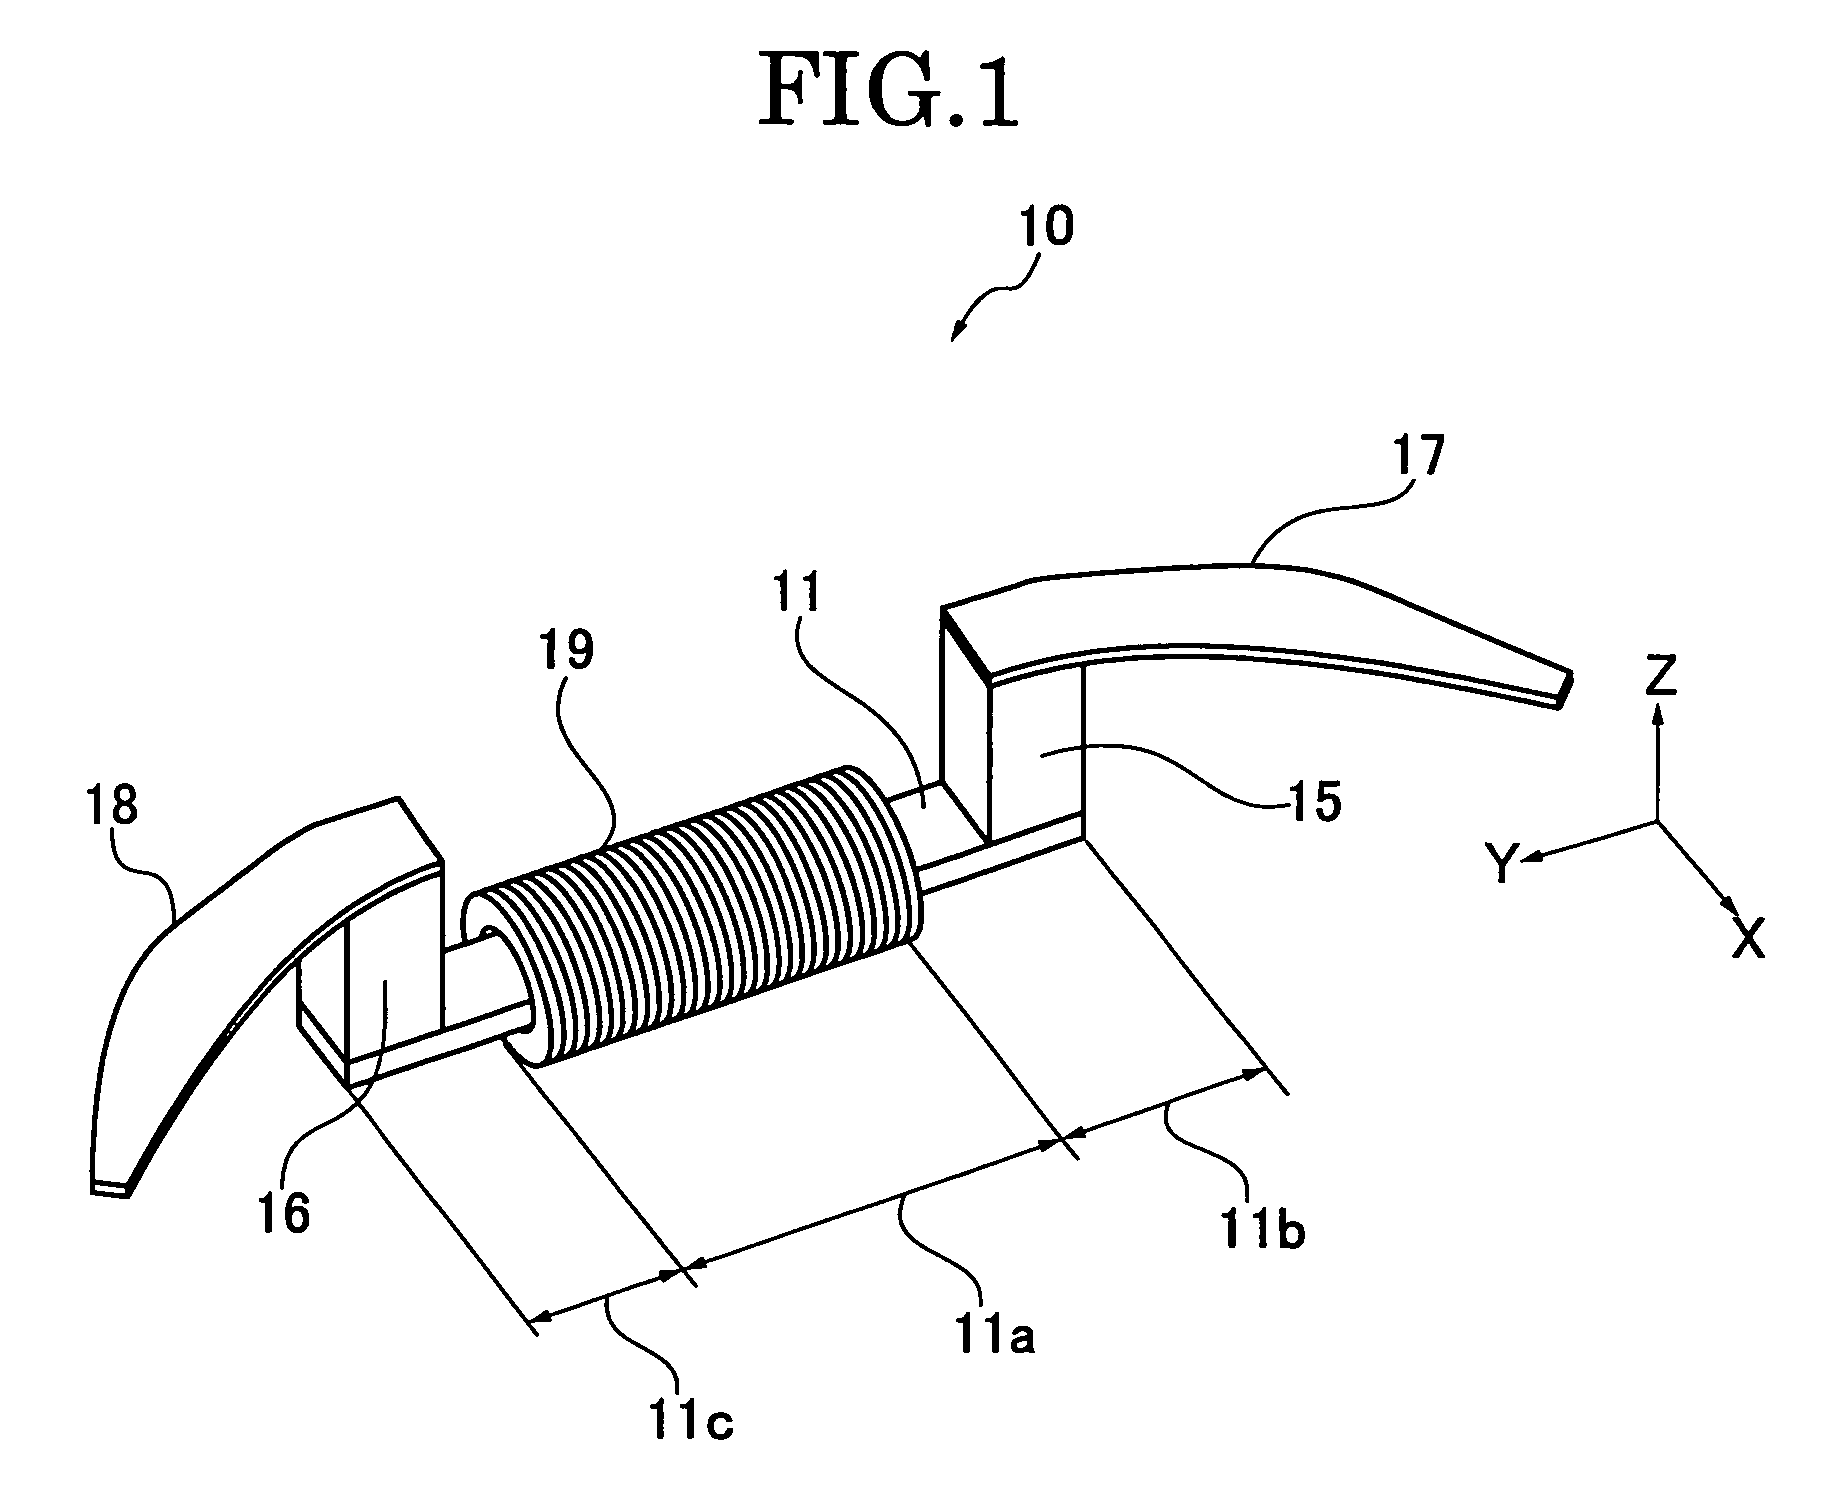 Radio-controlled timepiece and method of assembling the same